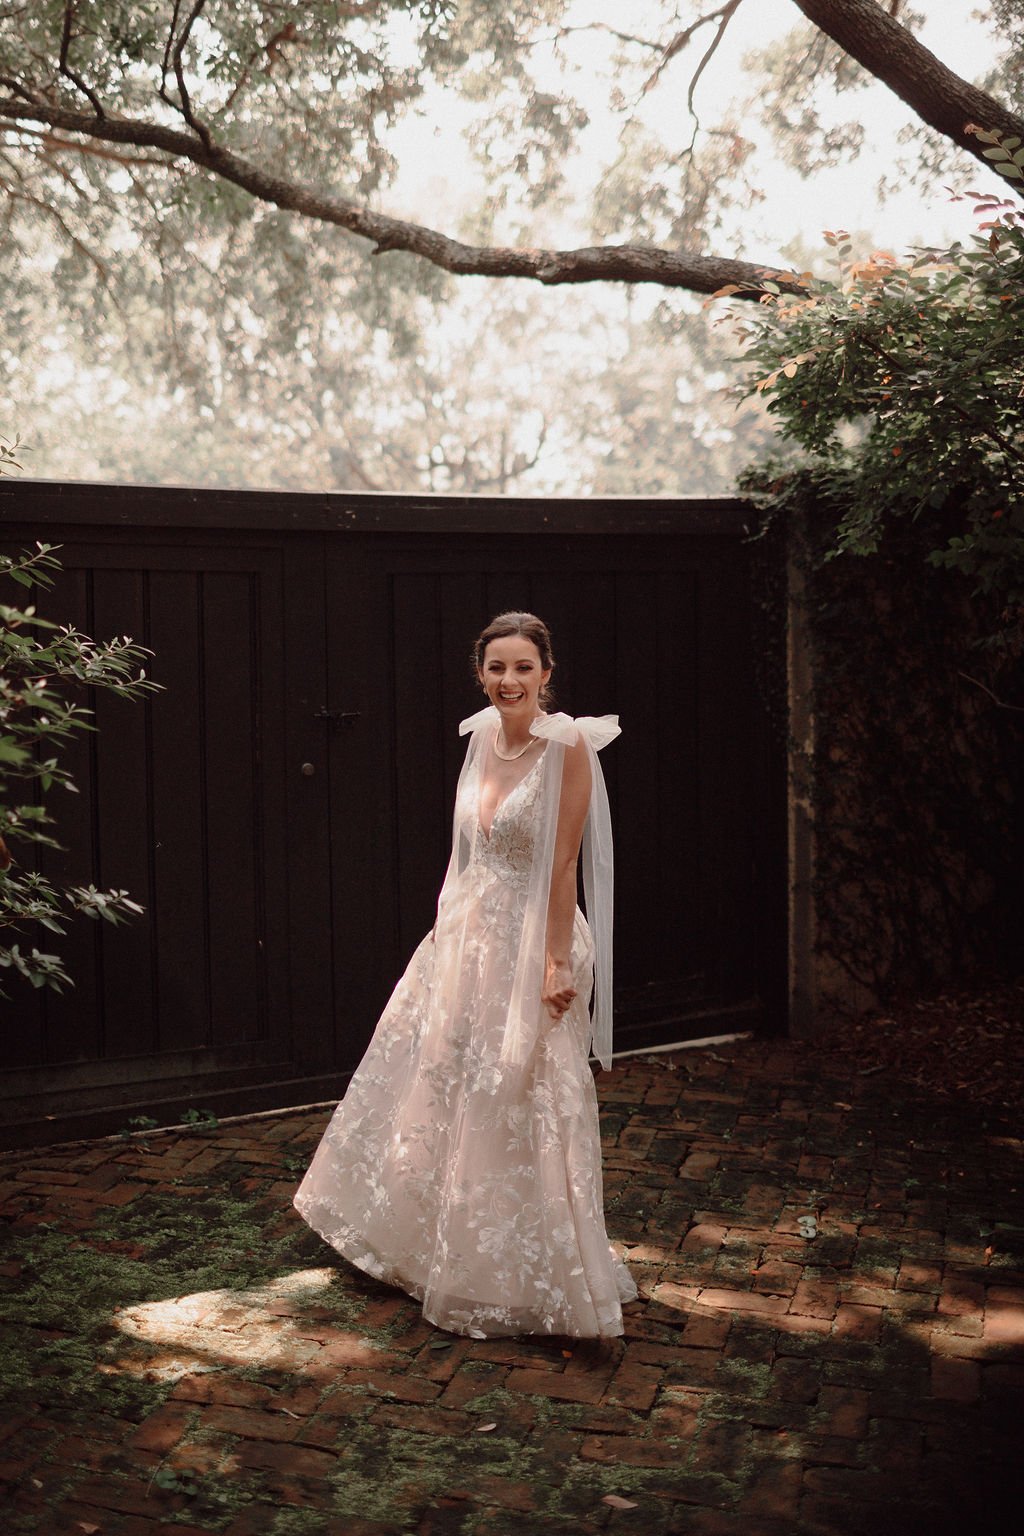 anna-in-the-elsie-gown-by-made-with-love-a-flowy-romantic-modern-lace-wedding-gown-purchased-from-savannah-bridal-shop-ivory-and-beau-8.jpg